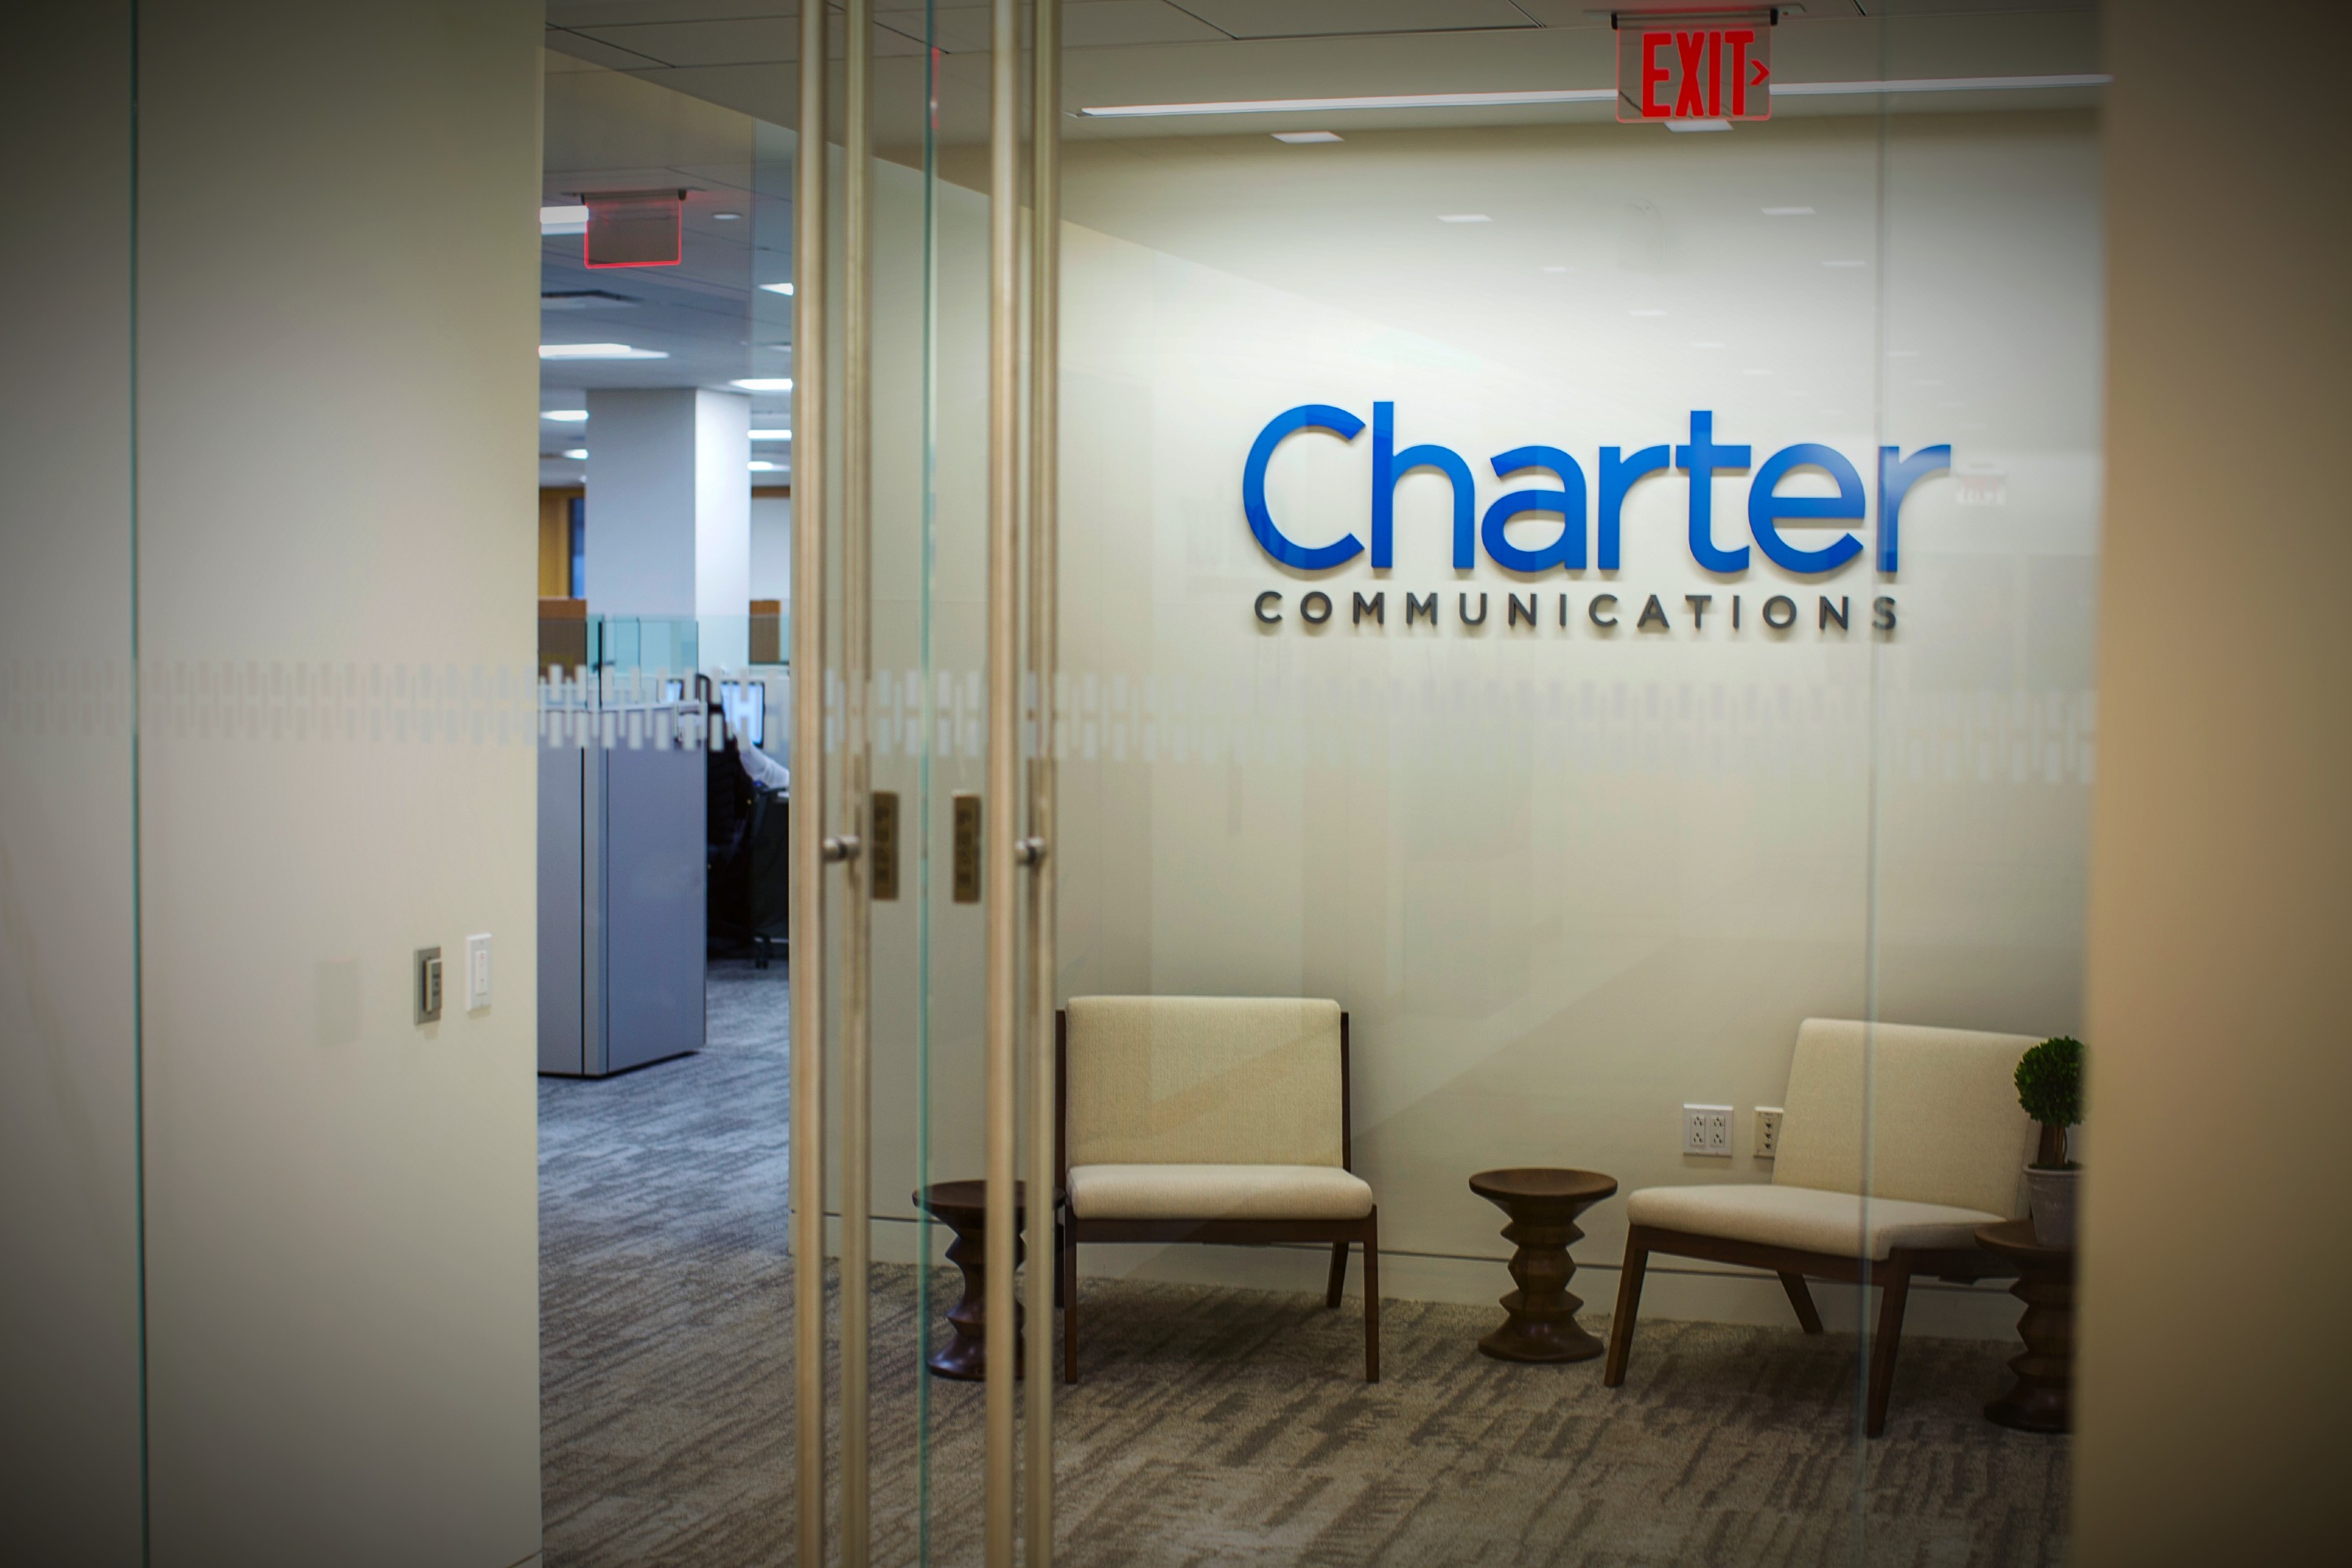 Charter Staff Told To Report To Offices Despite Positive